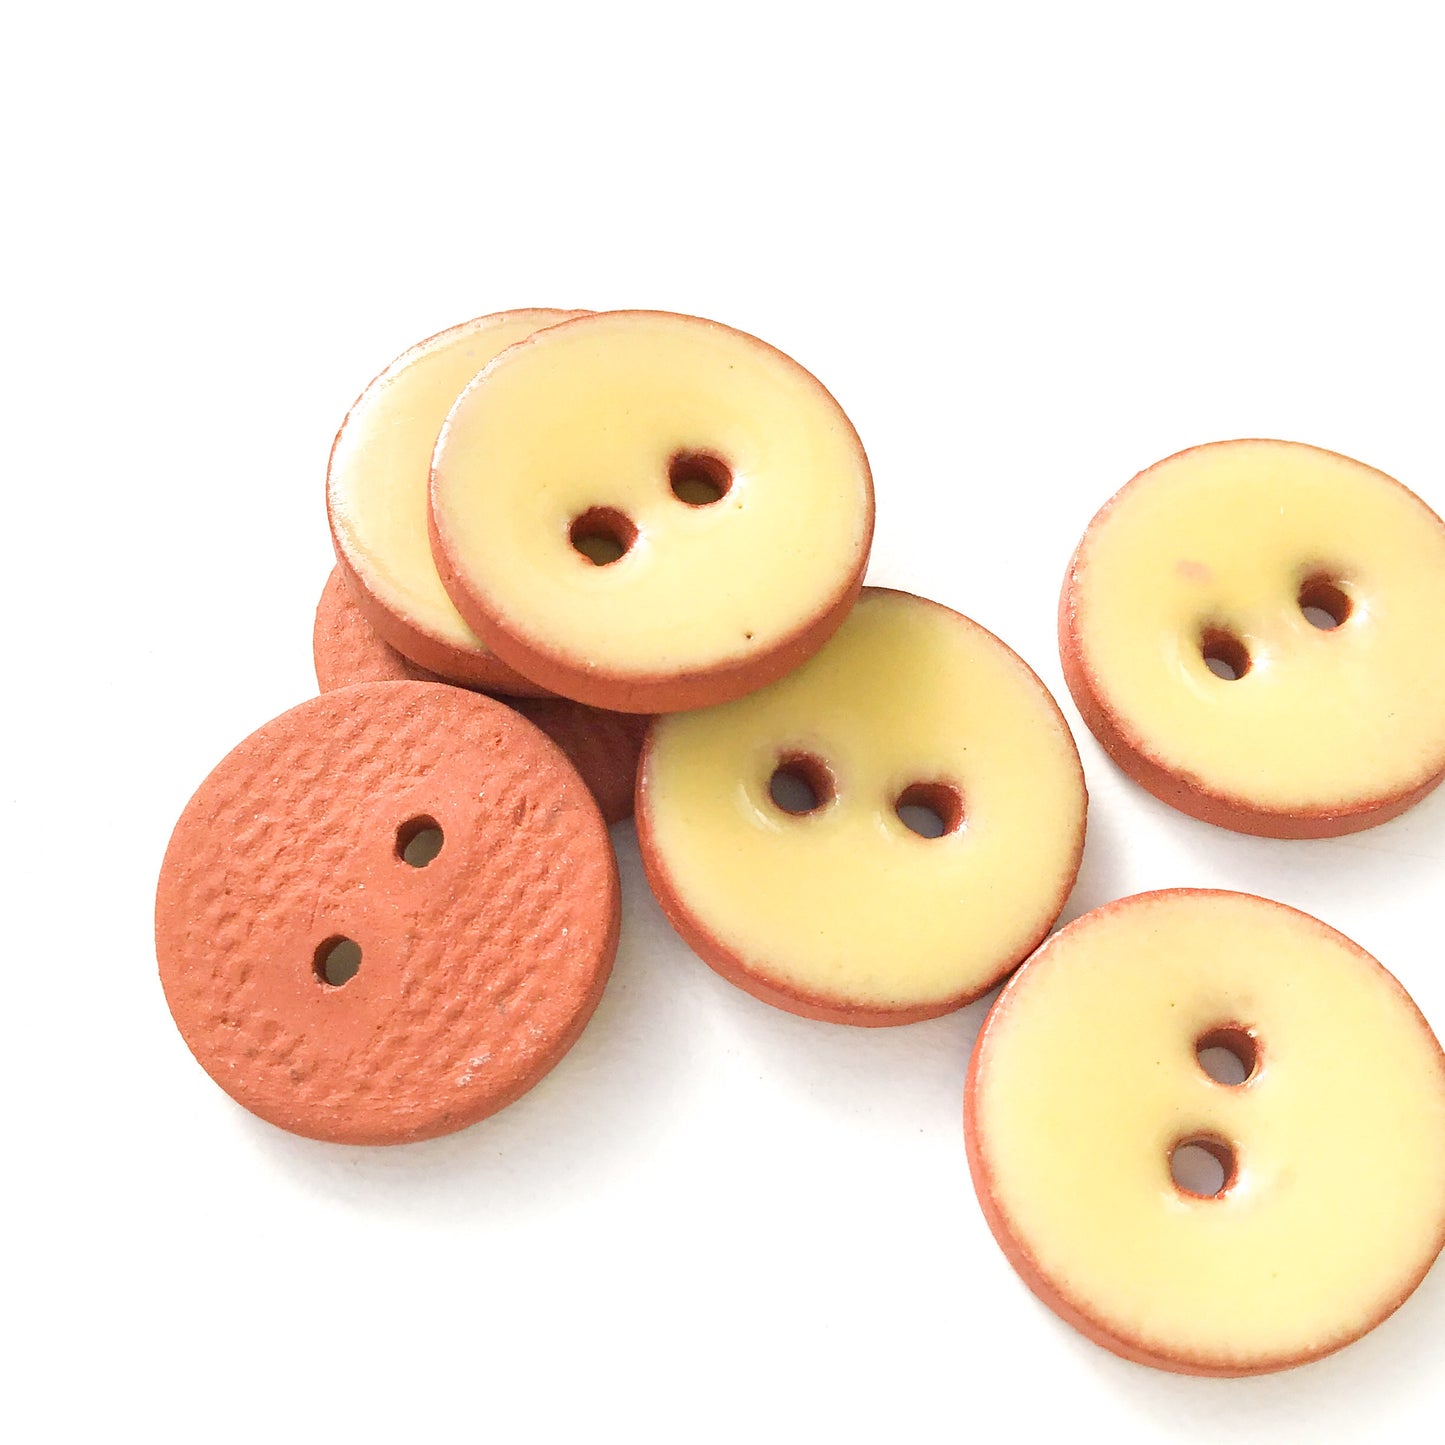 Creamy Yellow Ceramic Buttons - Clay Buttons - 5/8" - 7 Pack (ws-59)